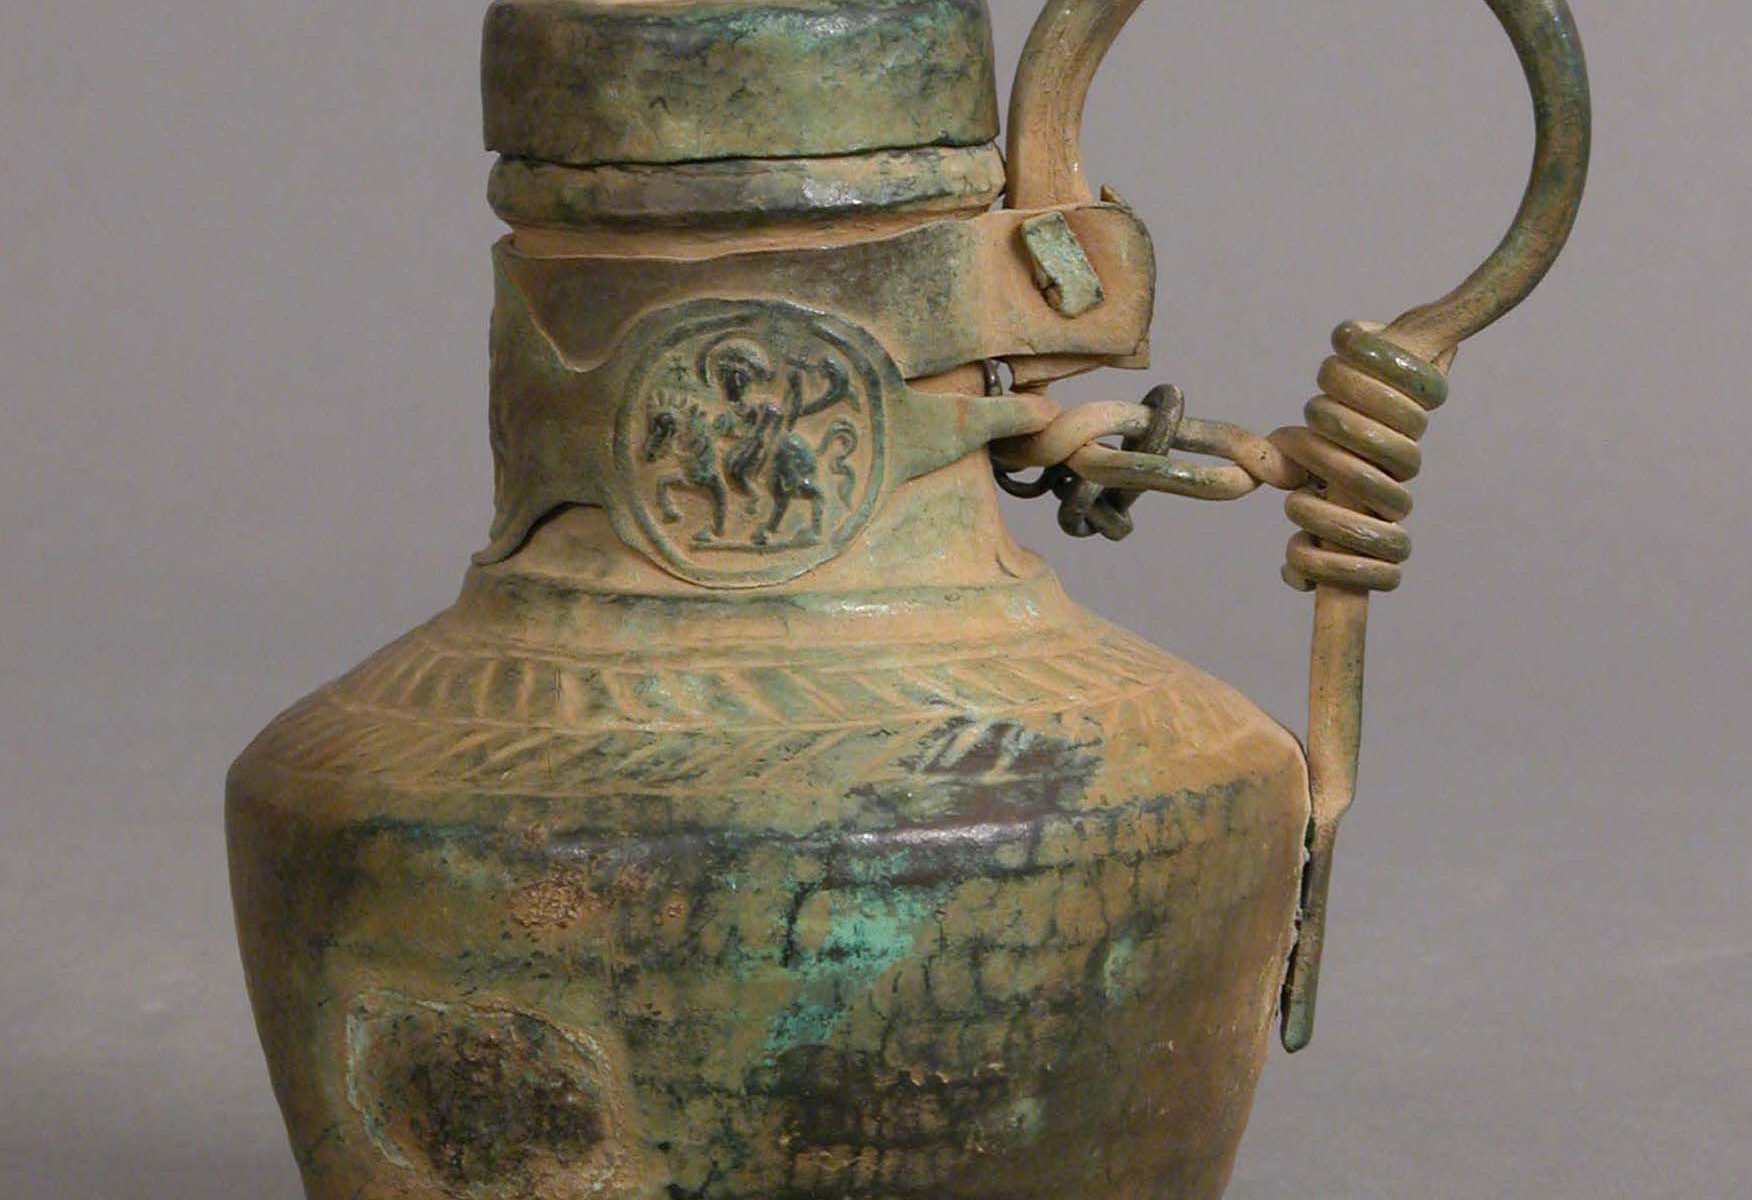 A copper alloy jug held at the Met, seventh century